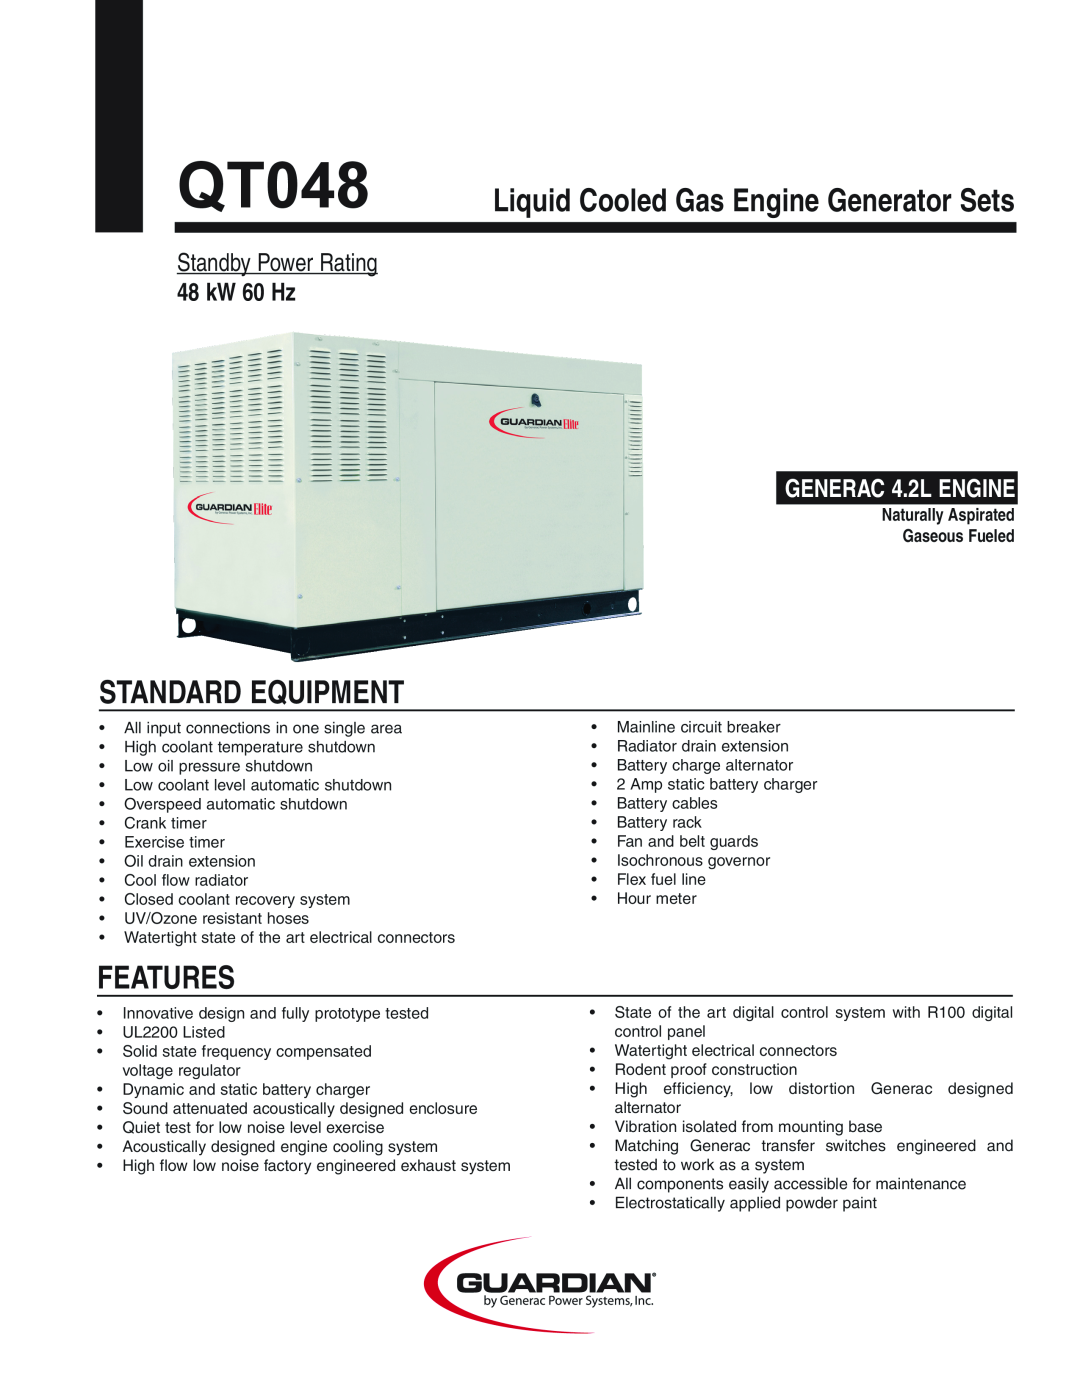 Guardian Technologies QT048 manual Liquid Cooled Gas Engine Generator Sets, Standby Power Rating, 48 kW 60 Hz 